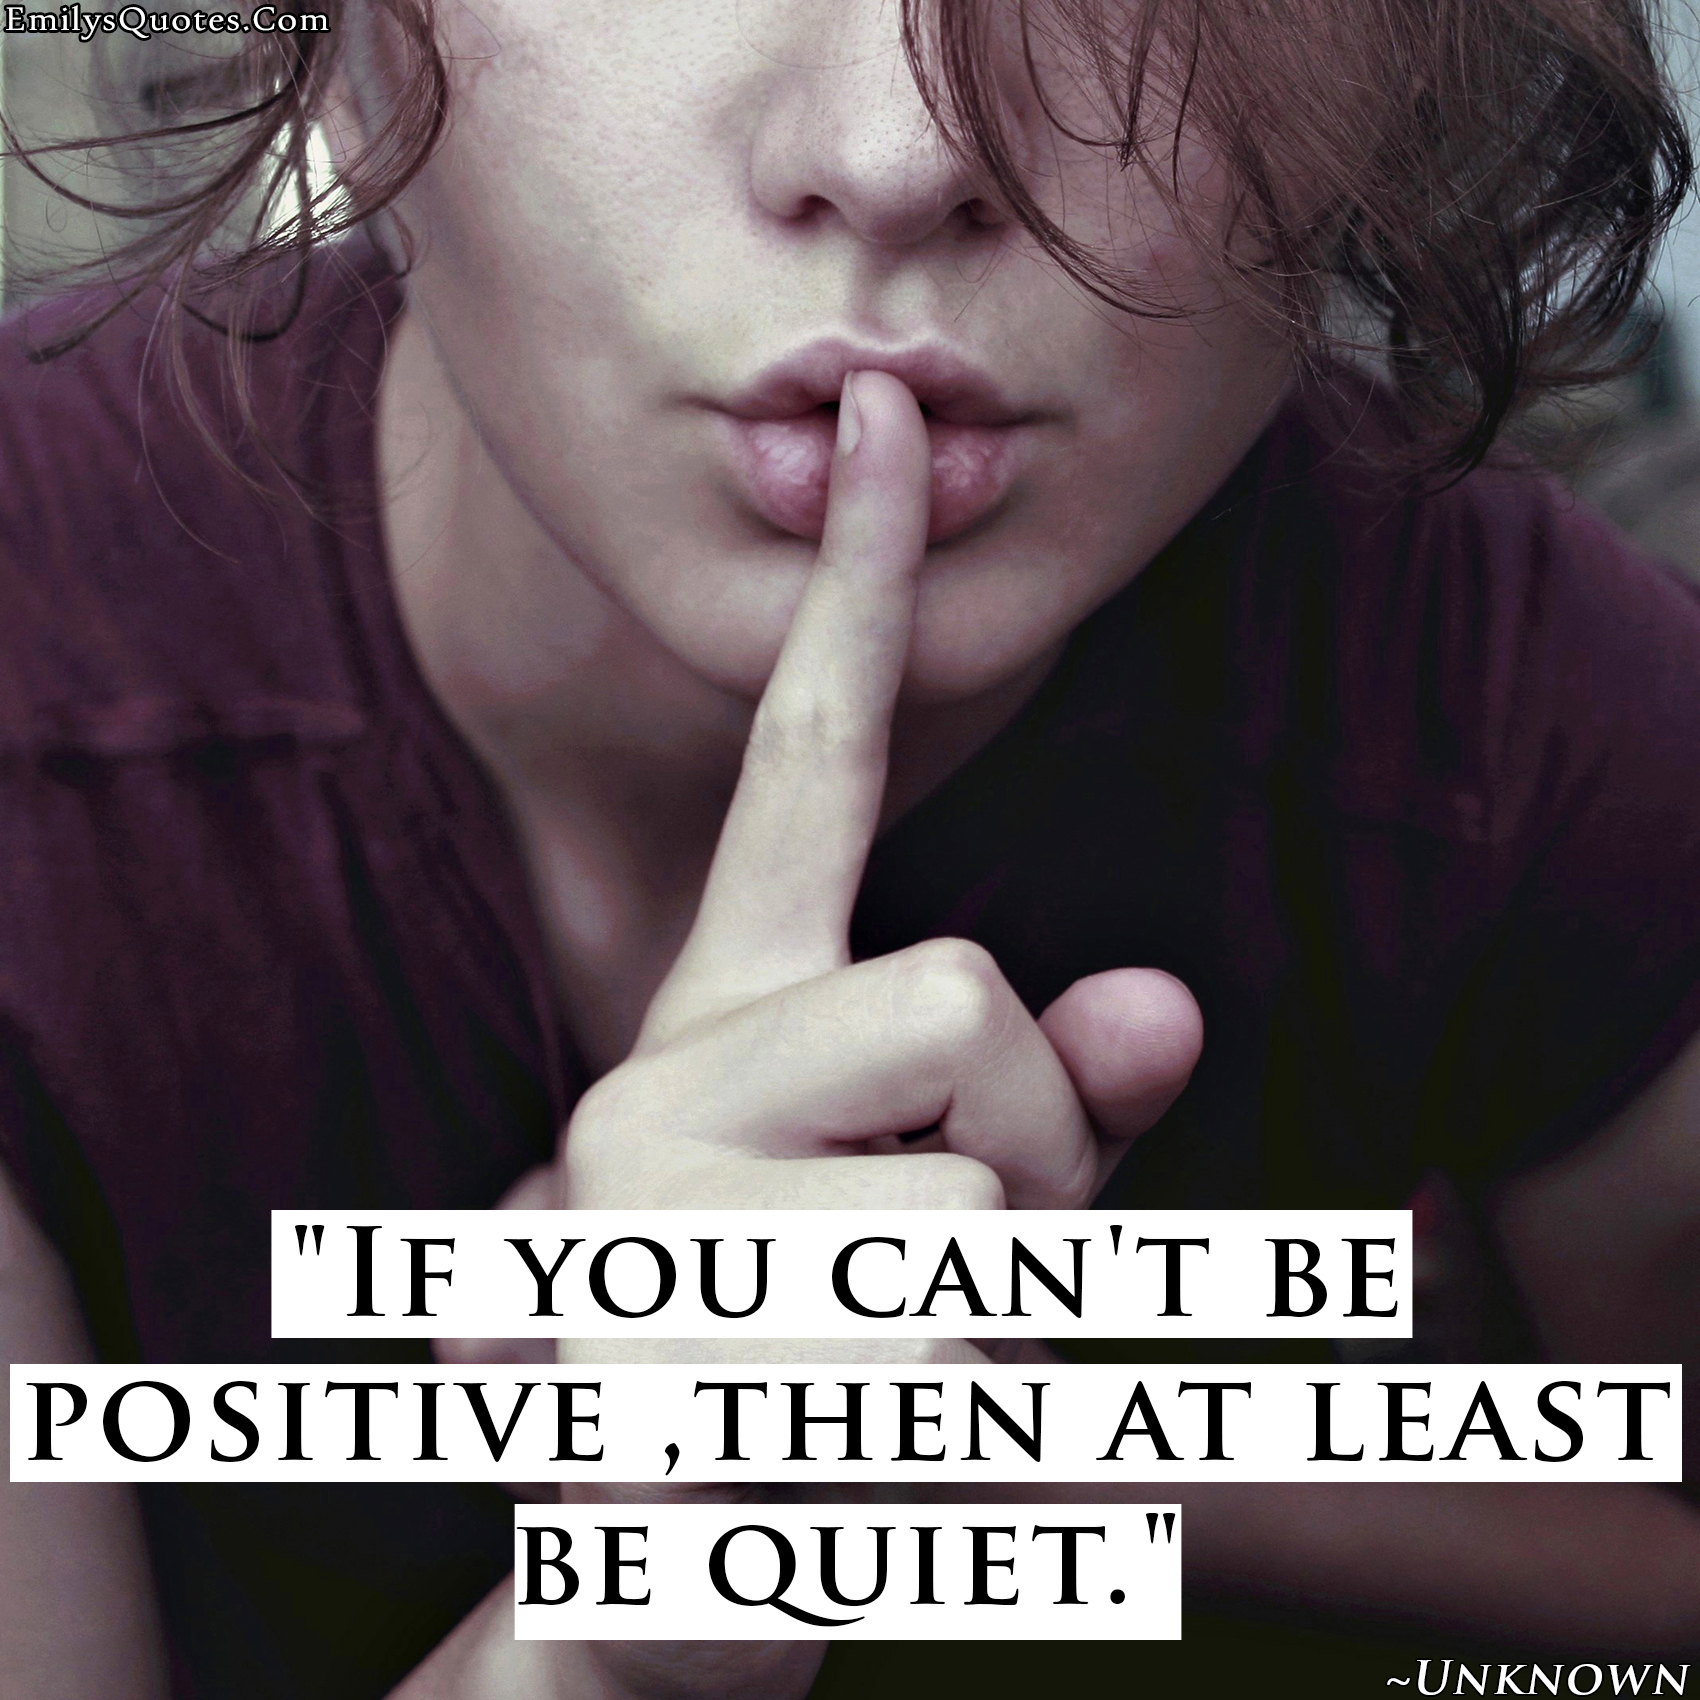 EmilysQuotes.Com-unknown-positive-communication-quiet-being-a-good-person.jpg